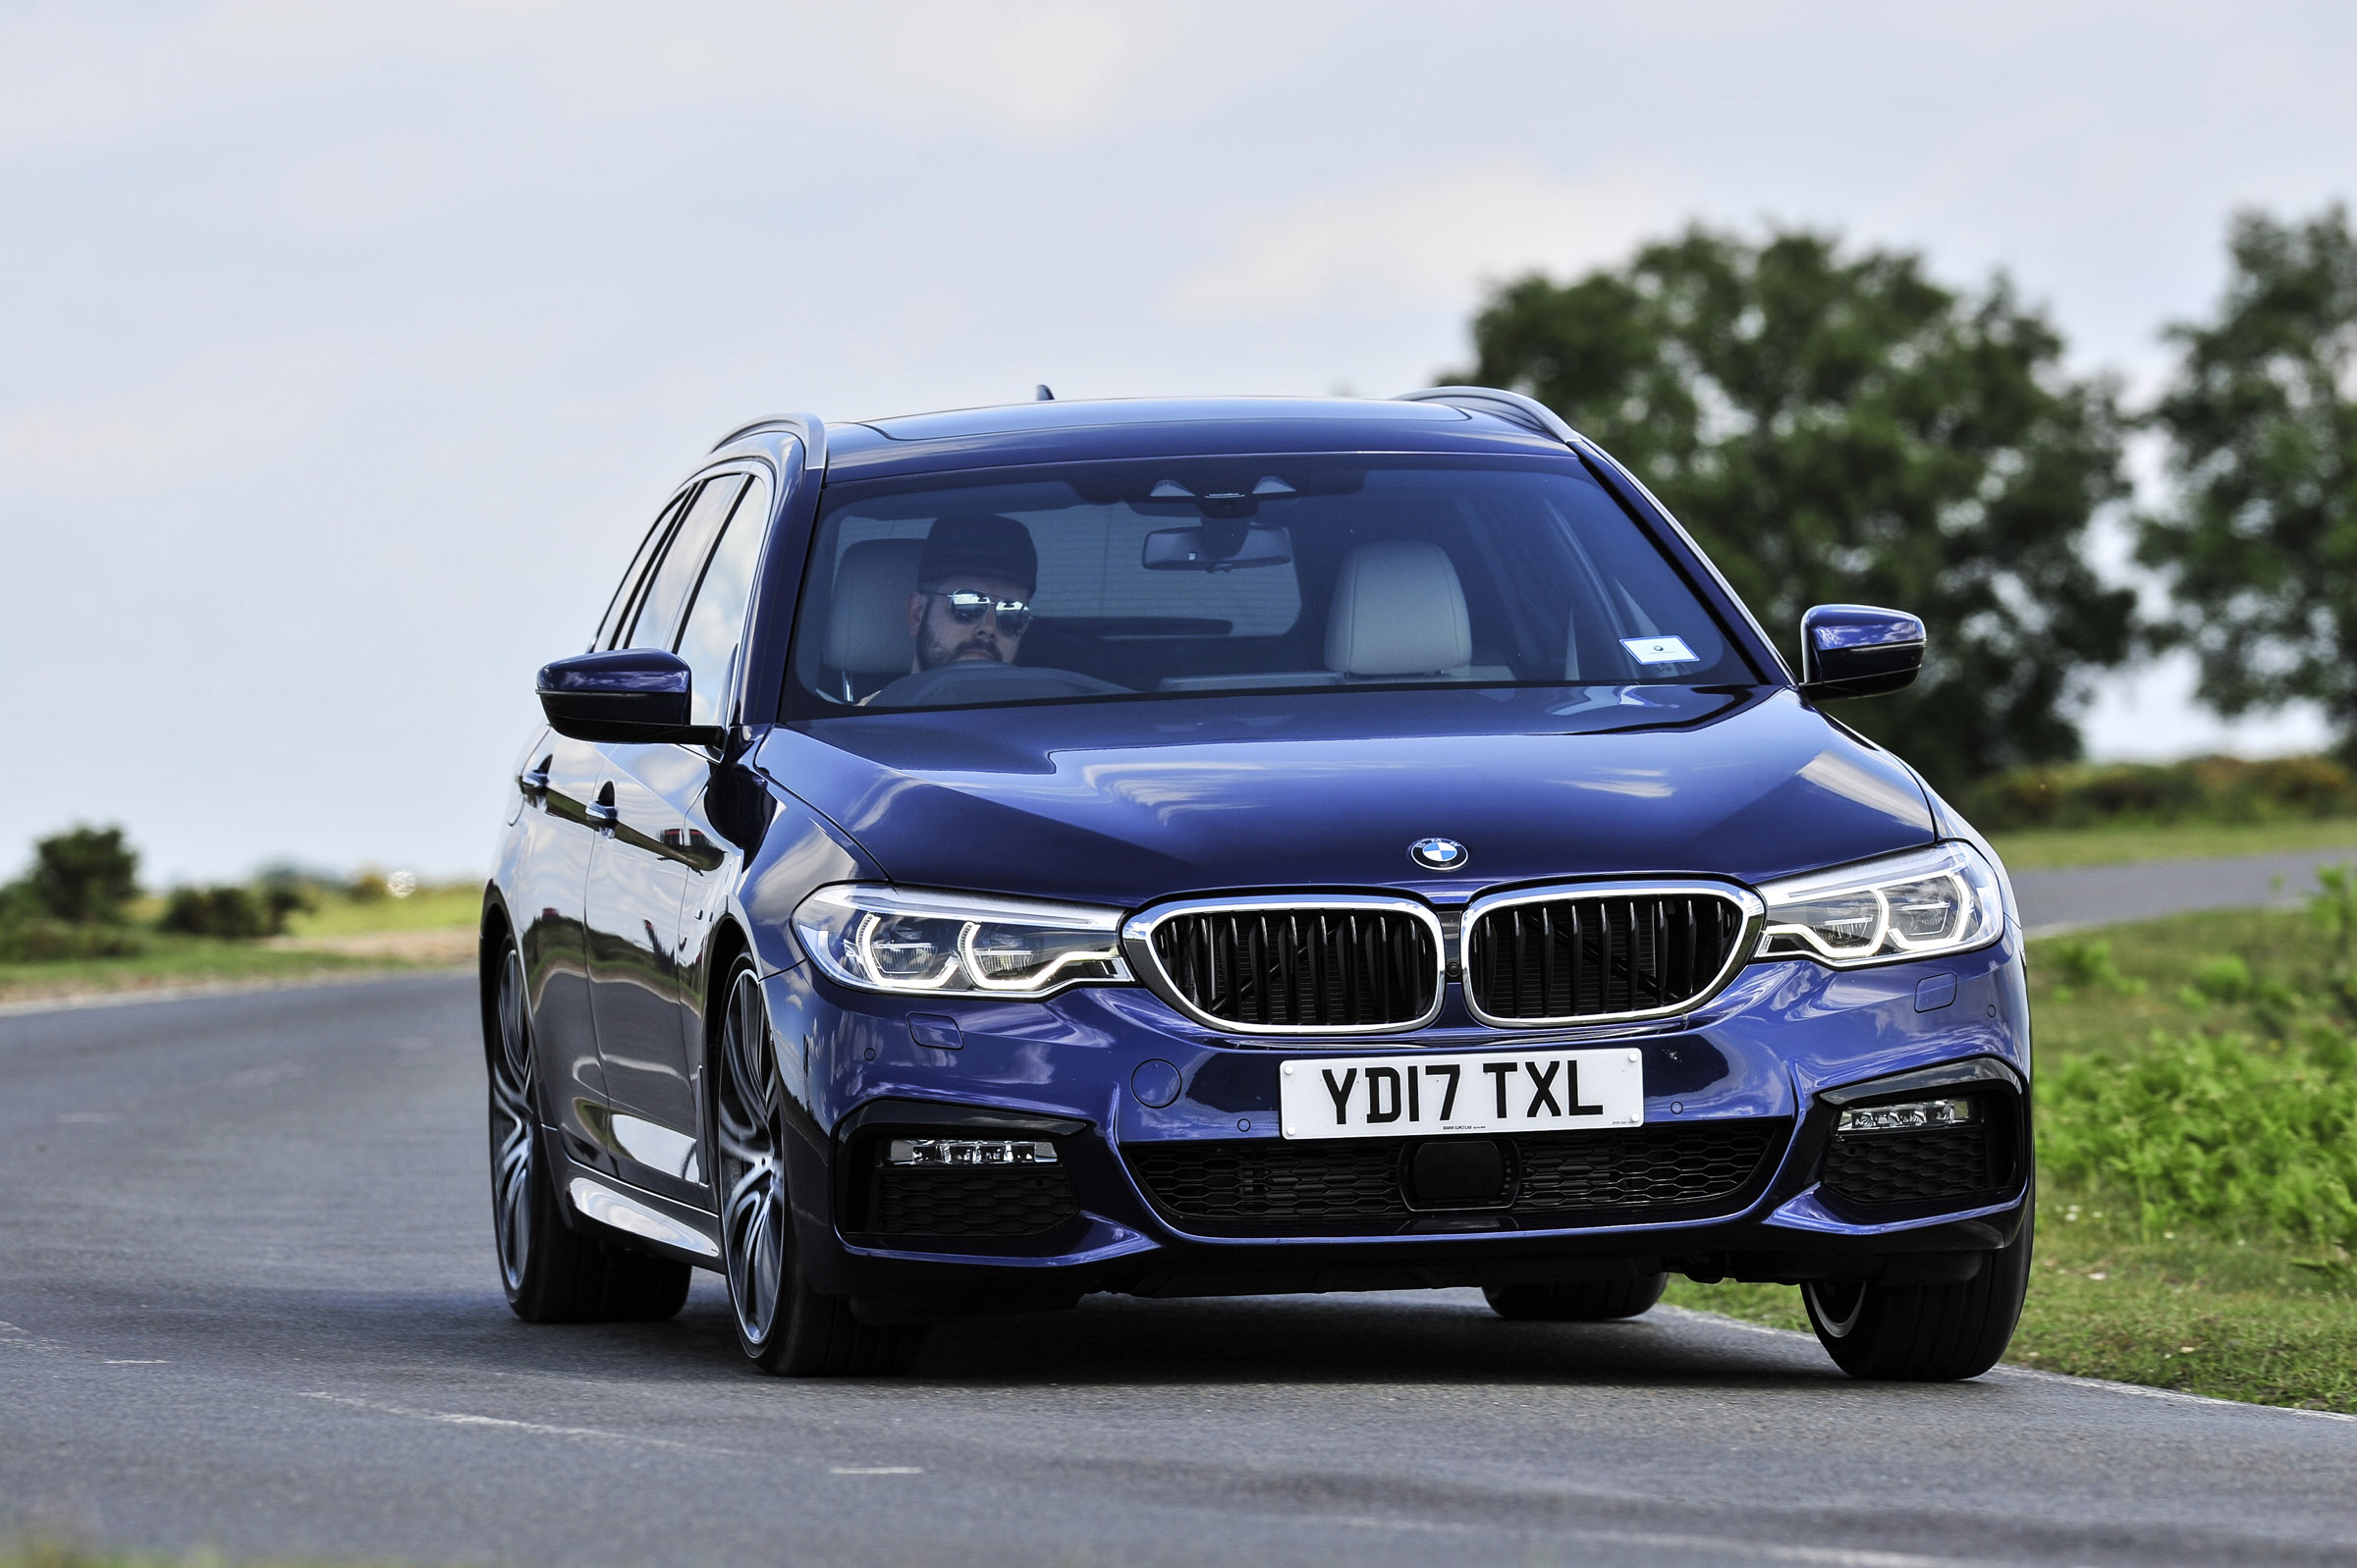 hoed Spreekwoord versterking BMW 5-series Touring review - Capability and practicality for latest Five |  evo